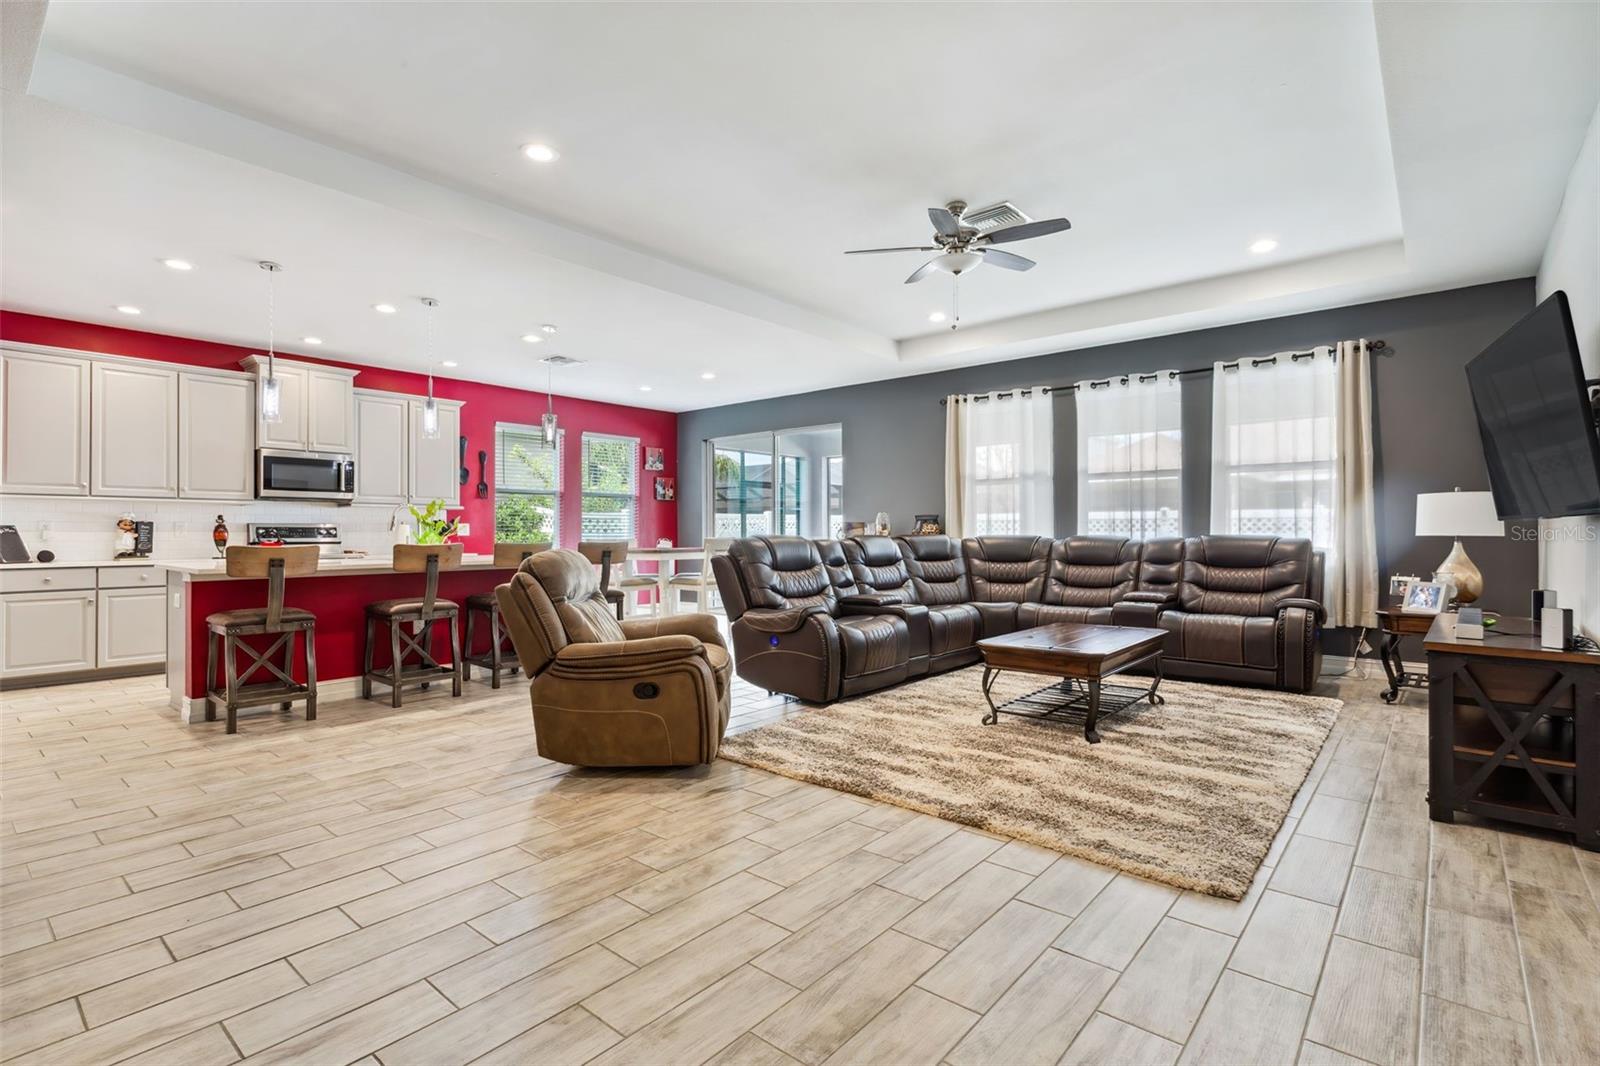 This huge open concept space has a great room with dinette area, and large kitchen.